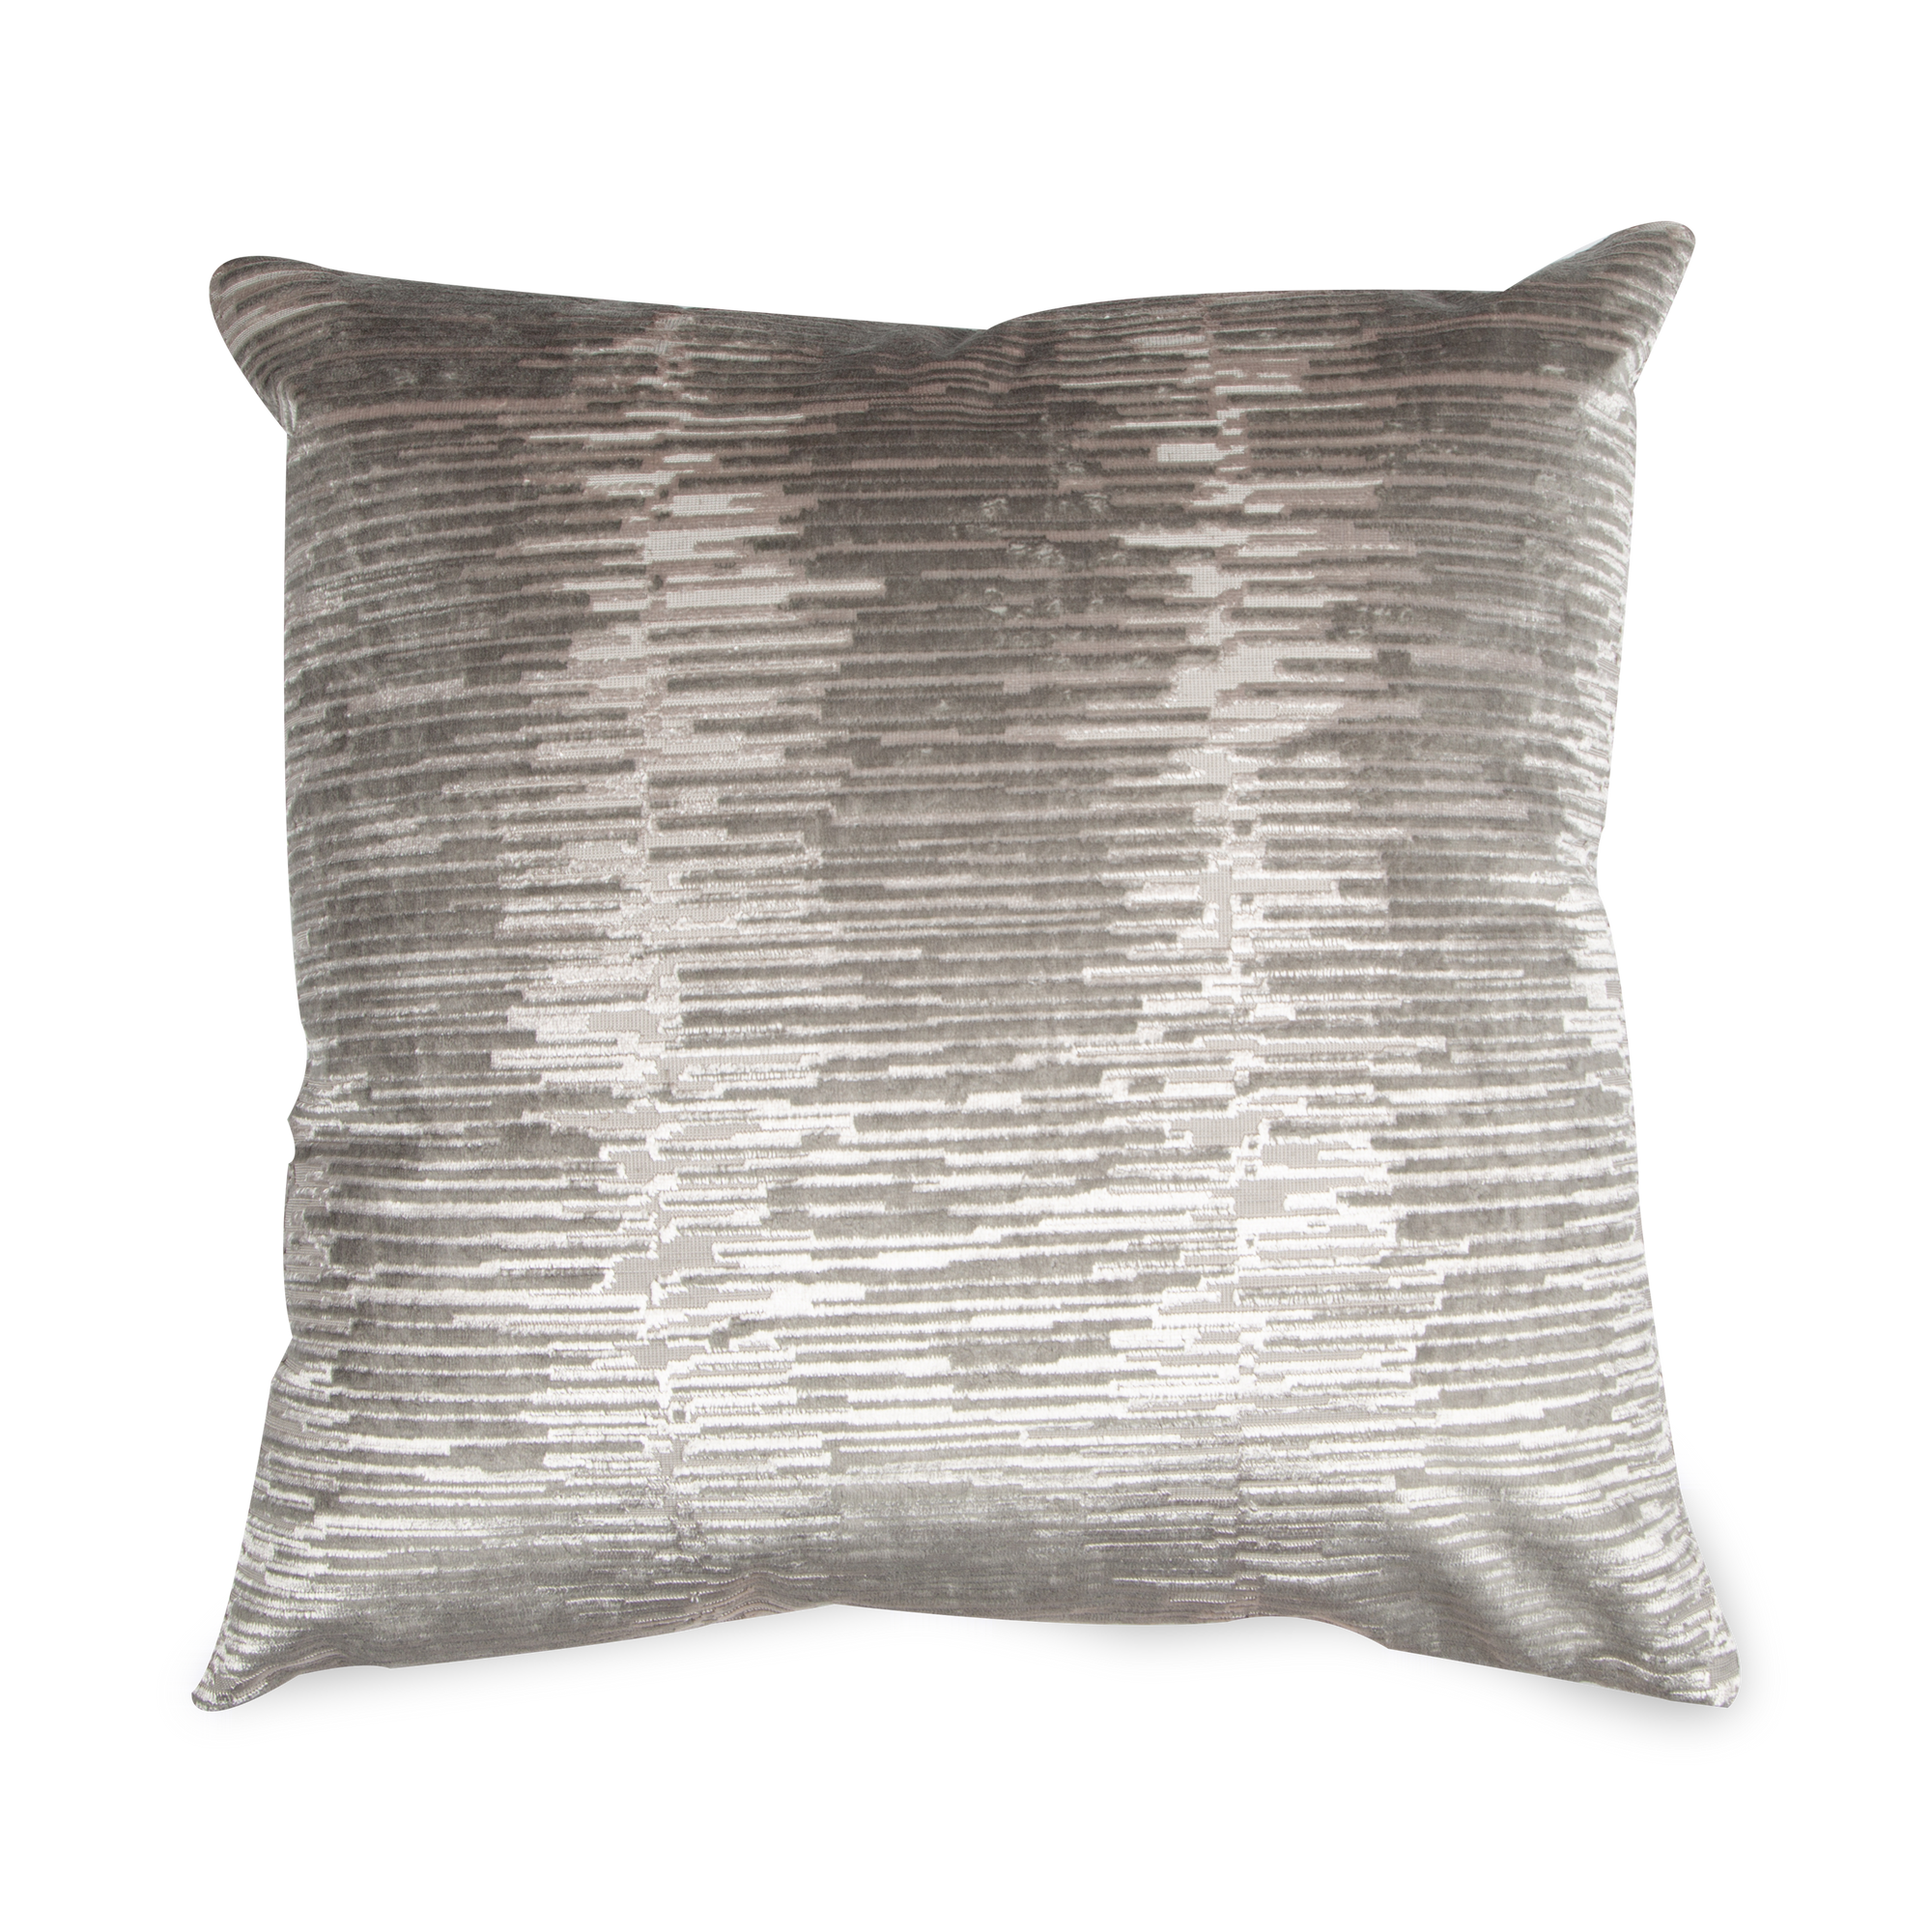 The Volt Pillow features a unique rippled texture with hues of grey.